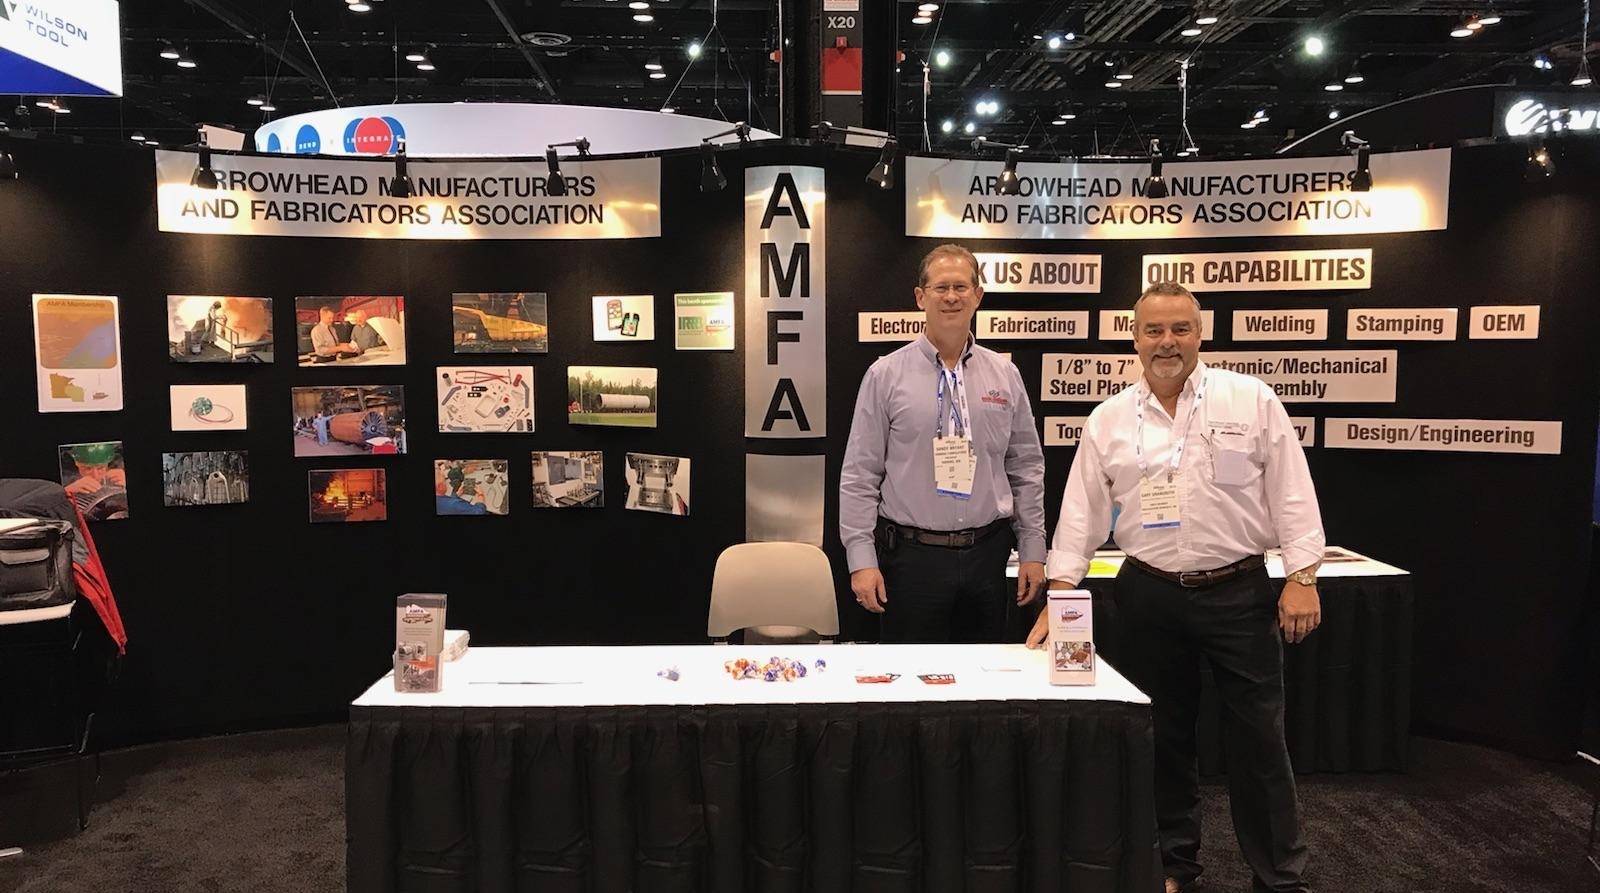 Representatives from Arrowhead Manufacturers and Fabricators Association stand at their booth at FABTECH 2017.